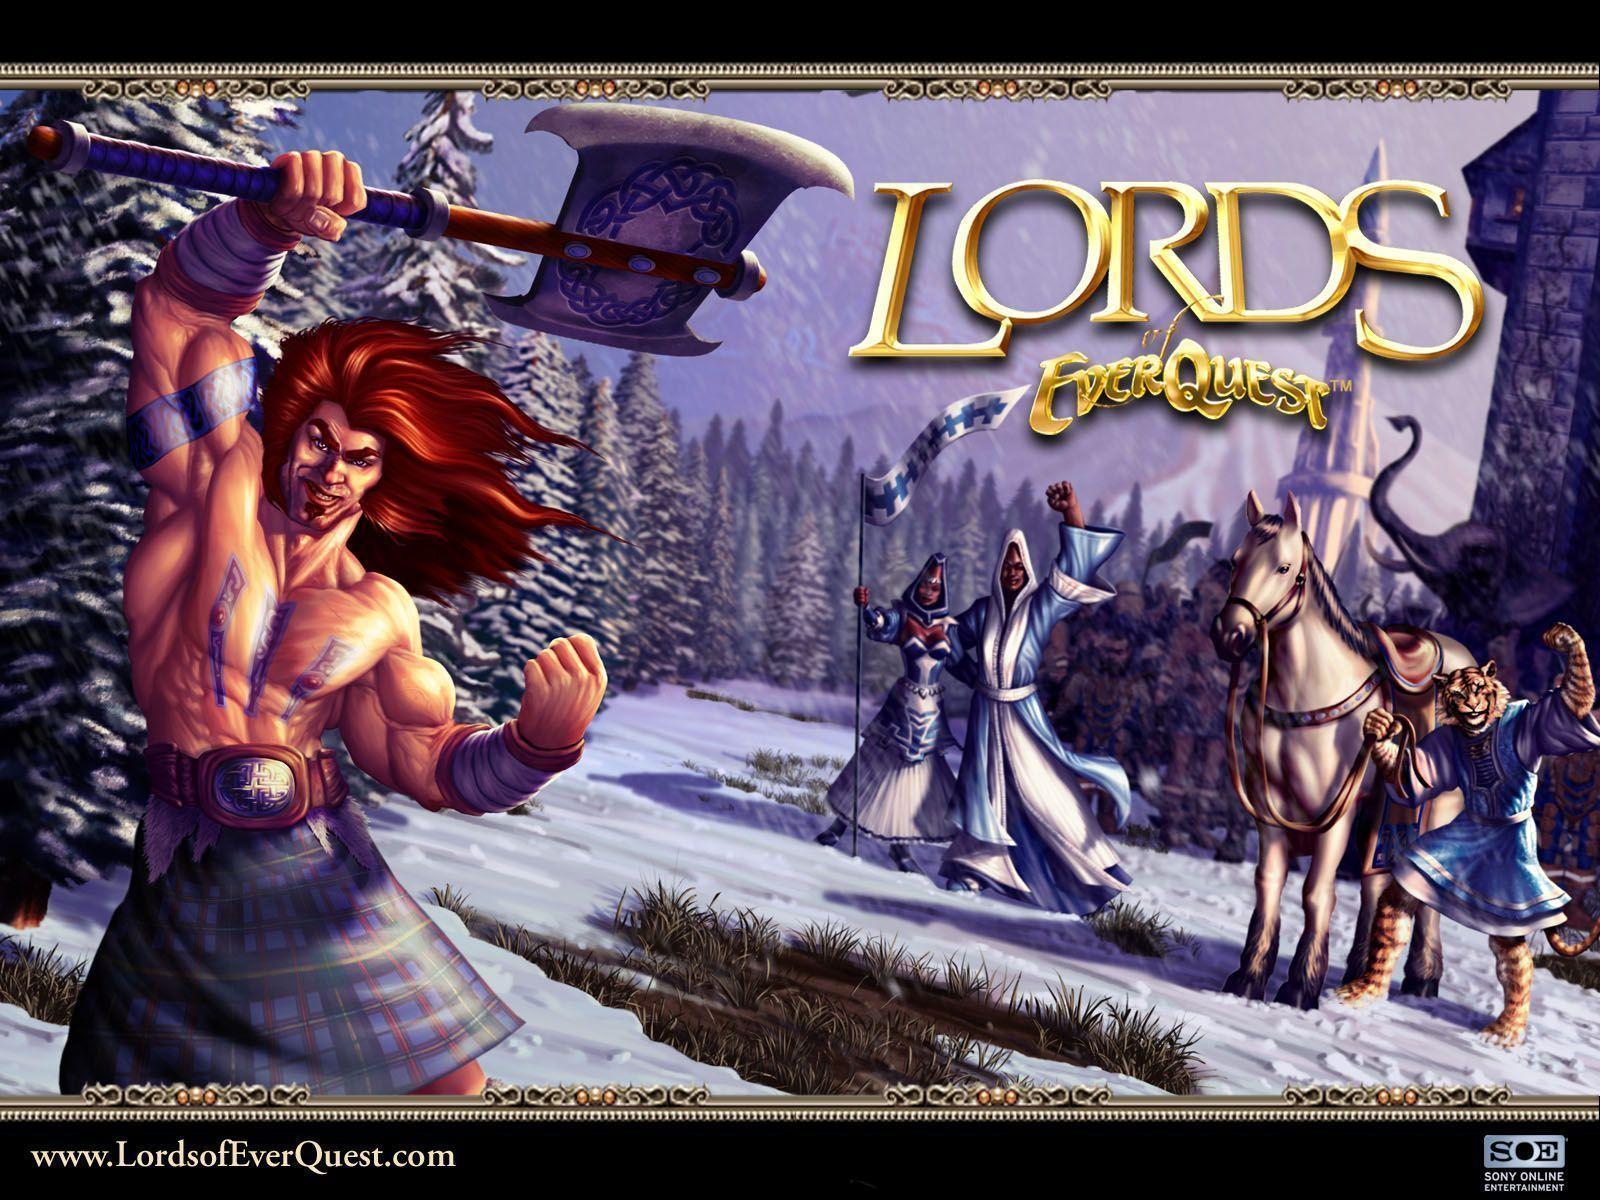 Lord of everquest steam фото 30